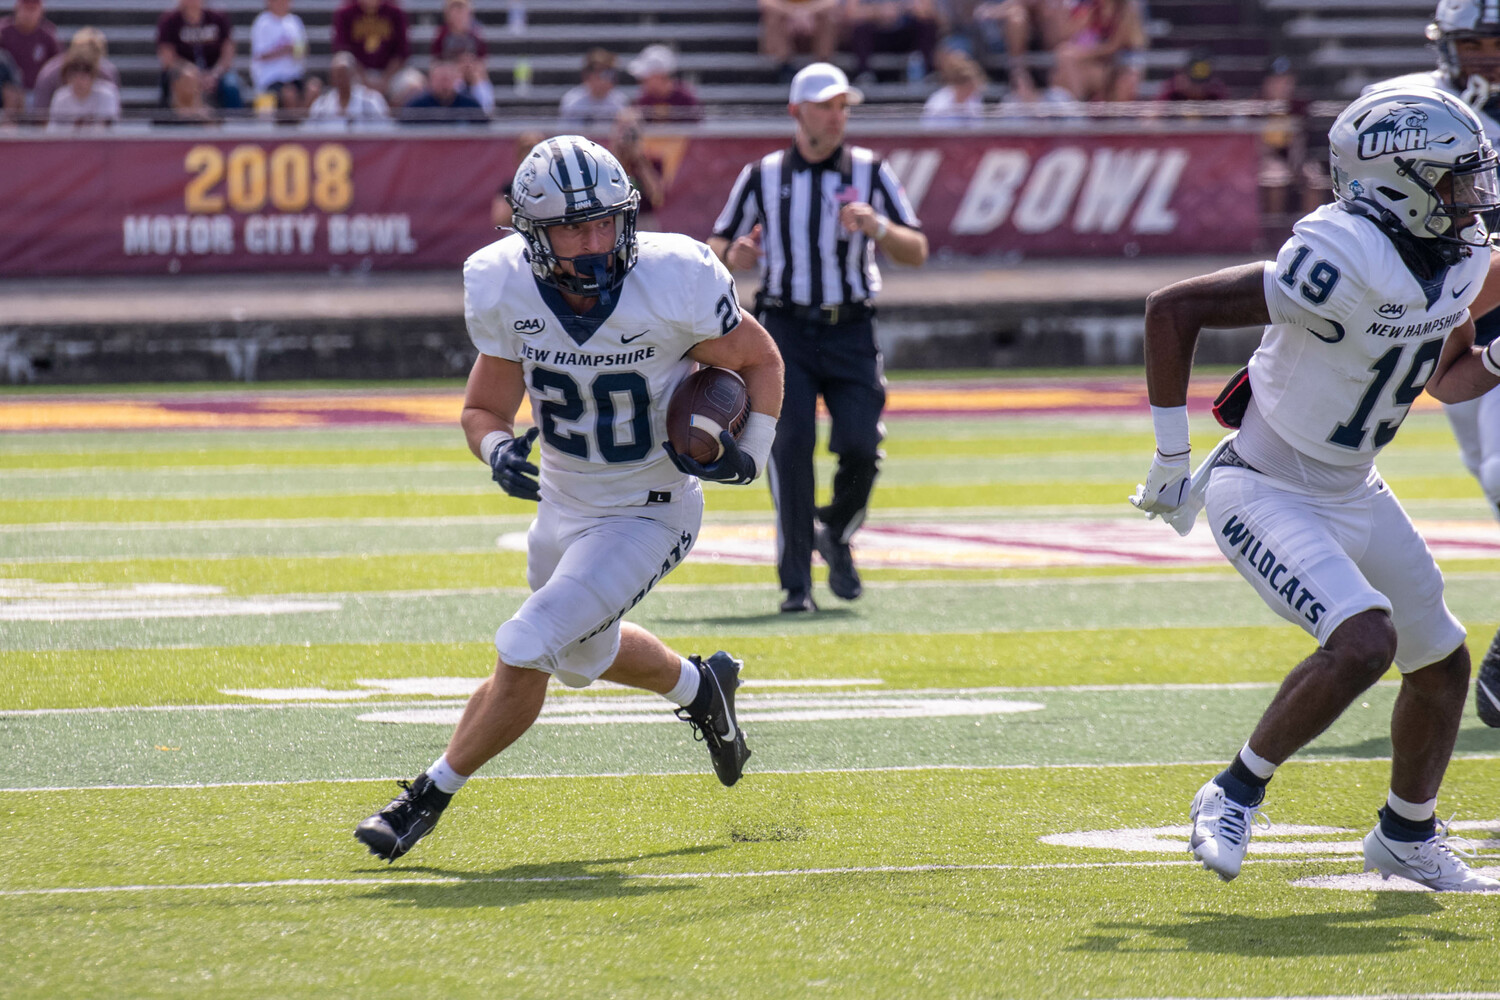 University of New Hampshire senior running back Dylan Laube finished with a school-record 295 receiving yards September 9 at Central Michigan University. UNIVERSITY OF NEW HAMPSHIRE ATHLETICS